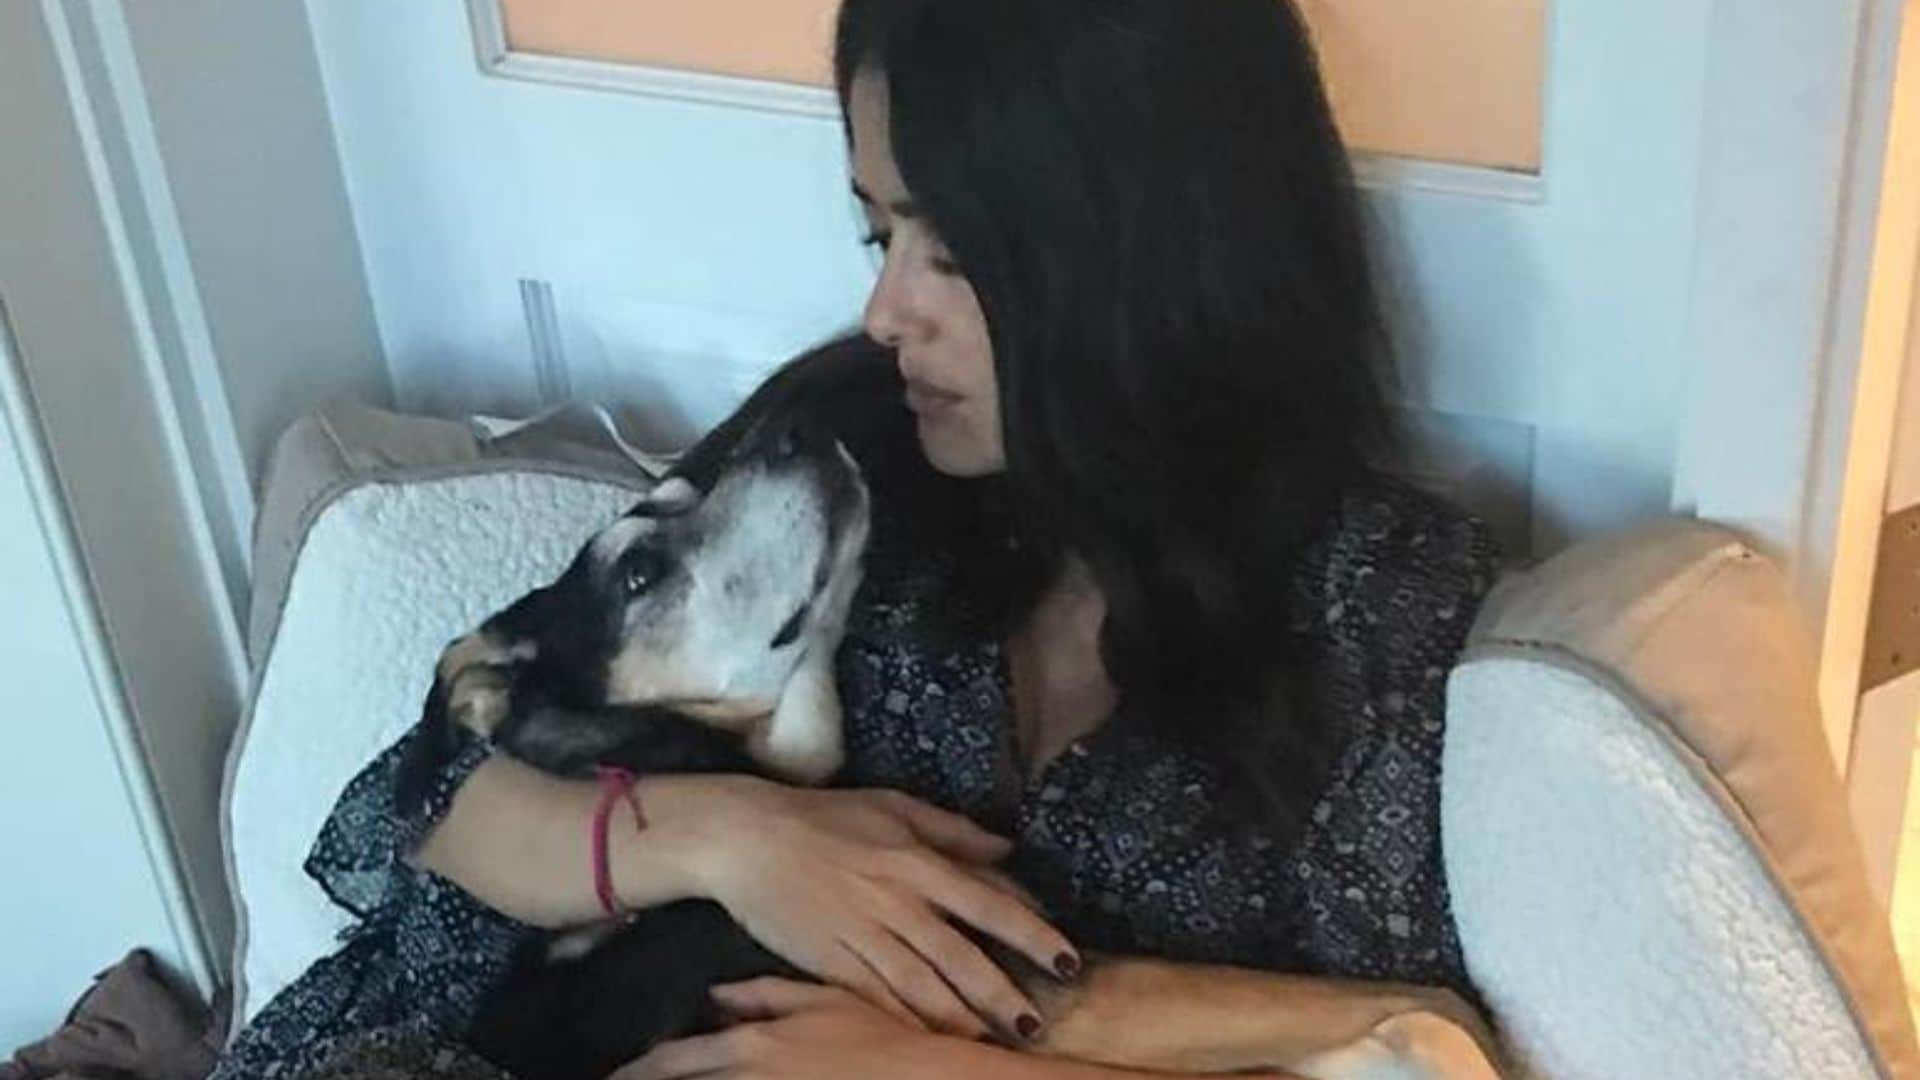 How Salma Hayek and other celebrities deal with the death of their pets